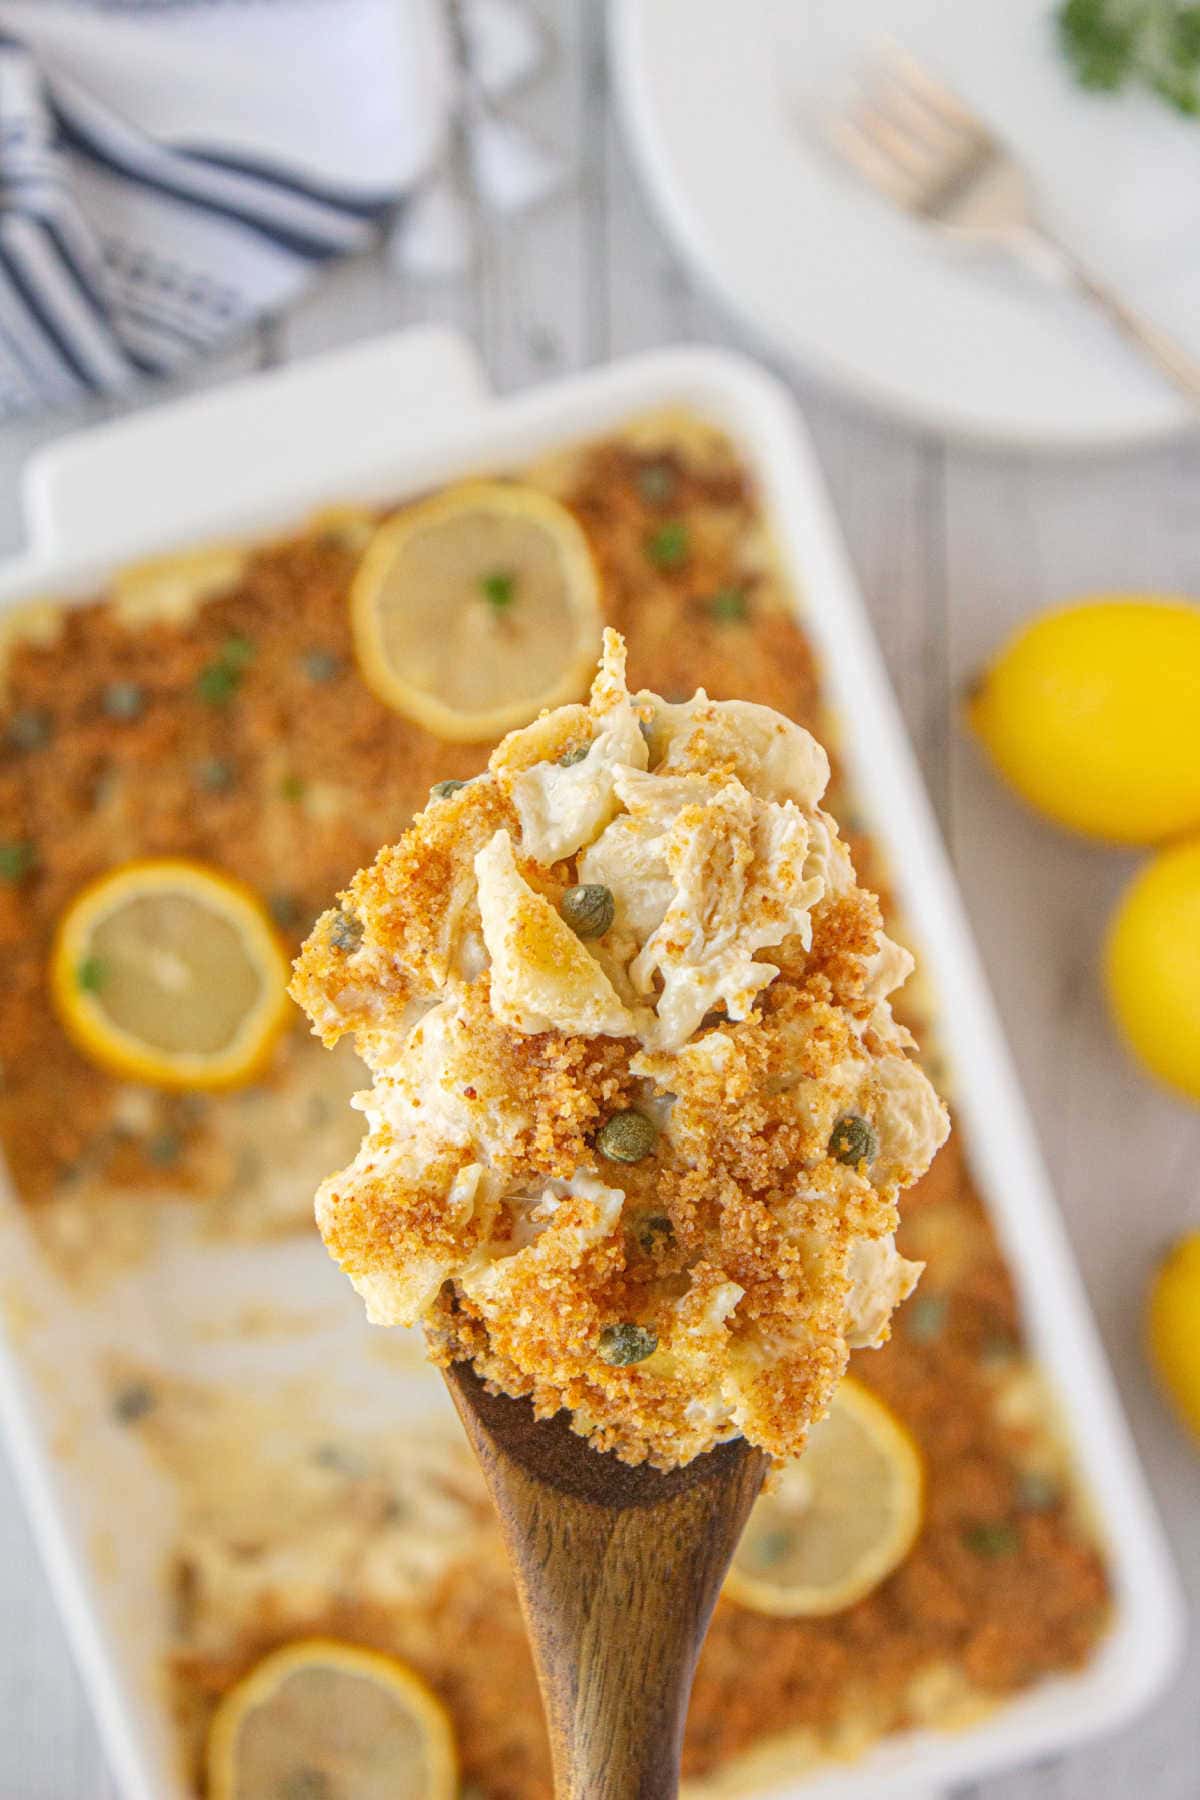 A serving of chicken piccata casserole being lifted from the casserole dish.